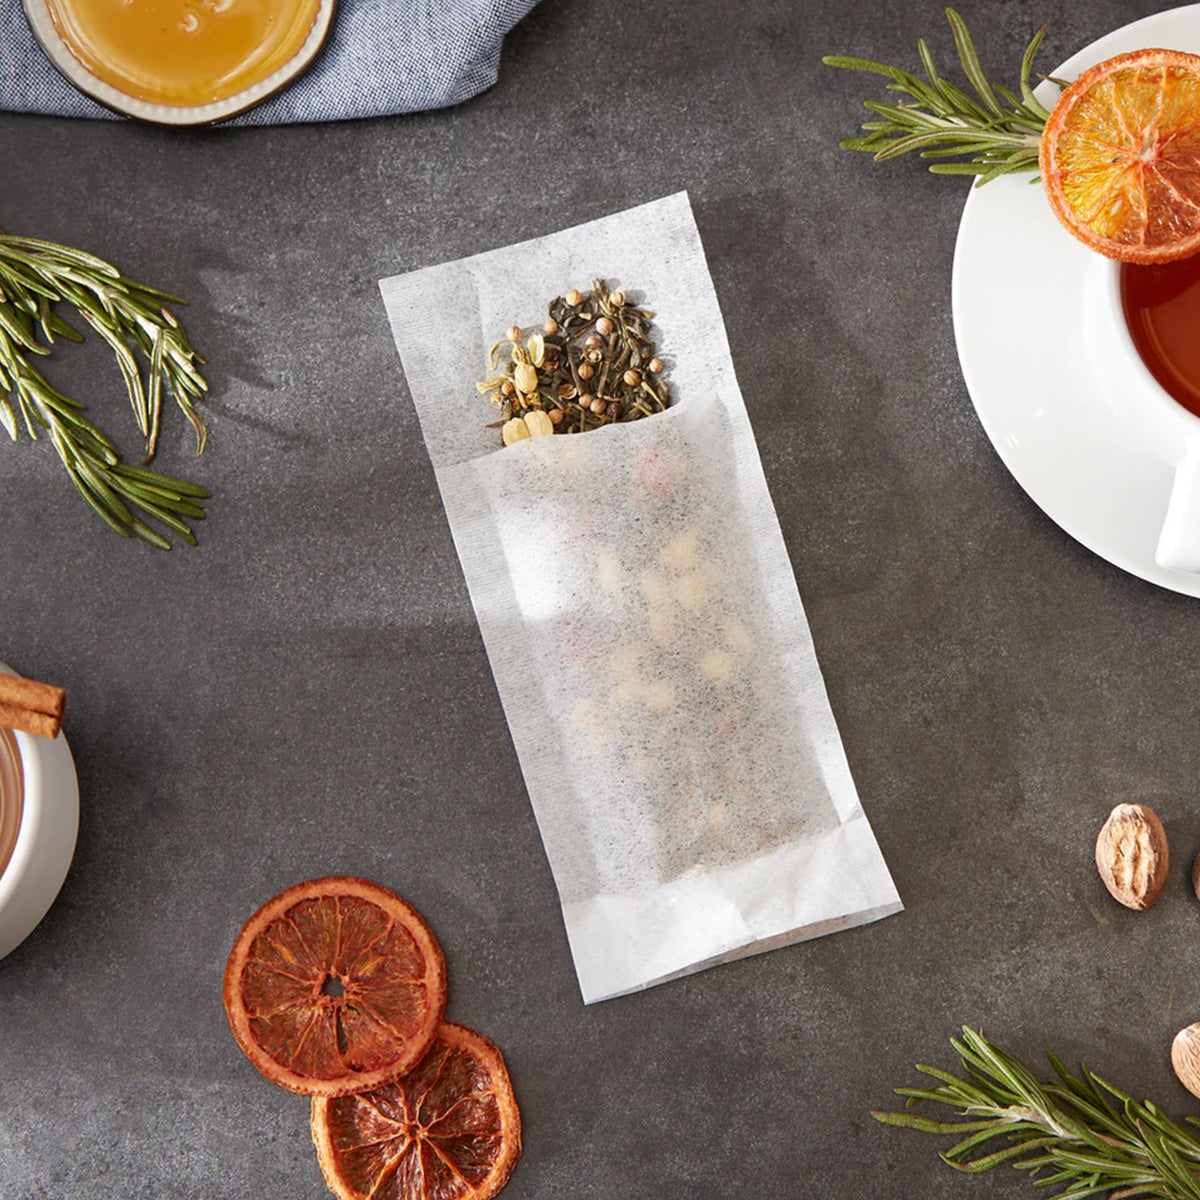 A bag of Large Tea Filters from RSVP International with cinnamon sticks and oranges on a table.